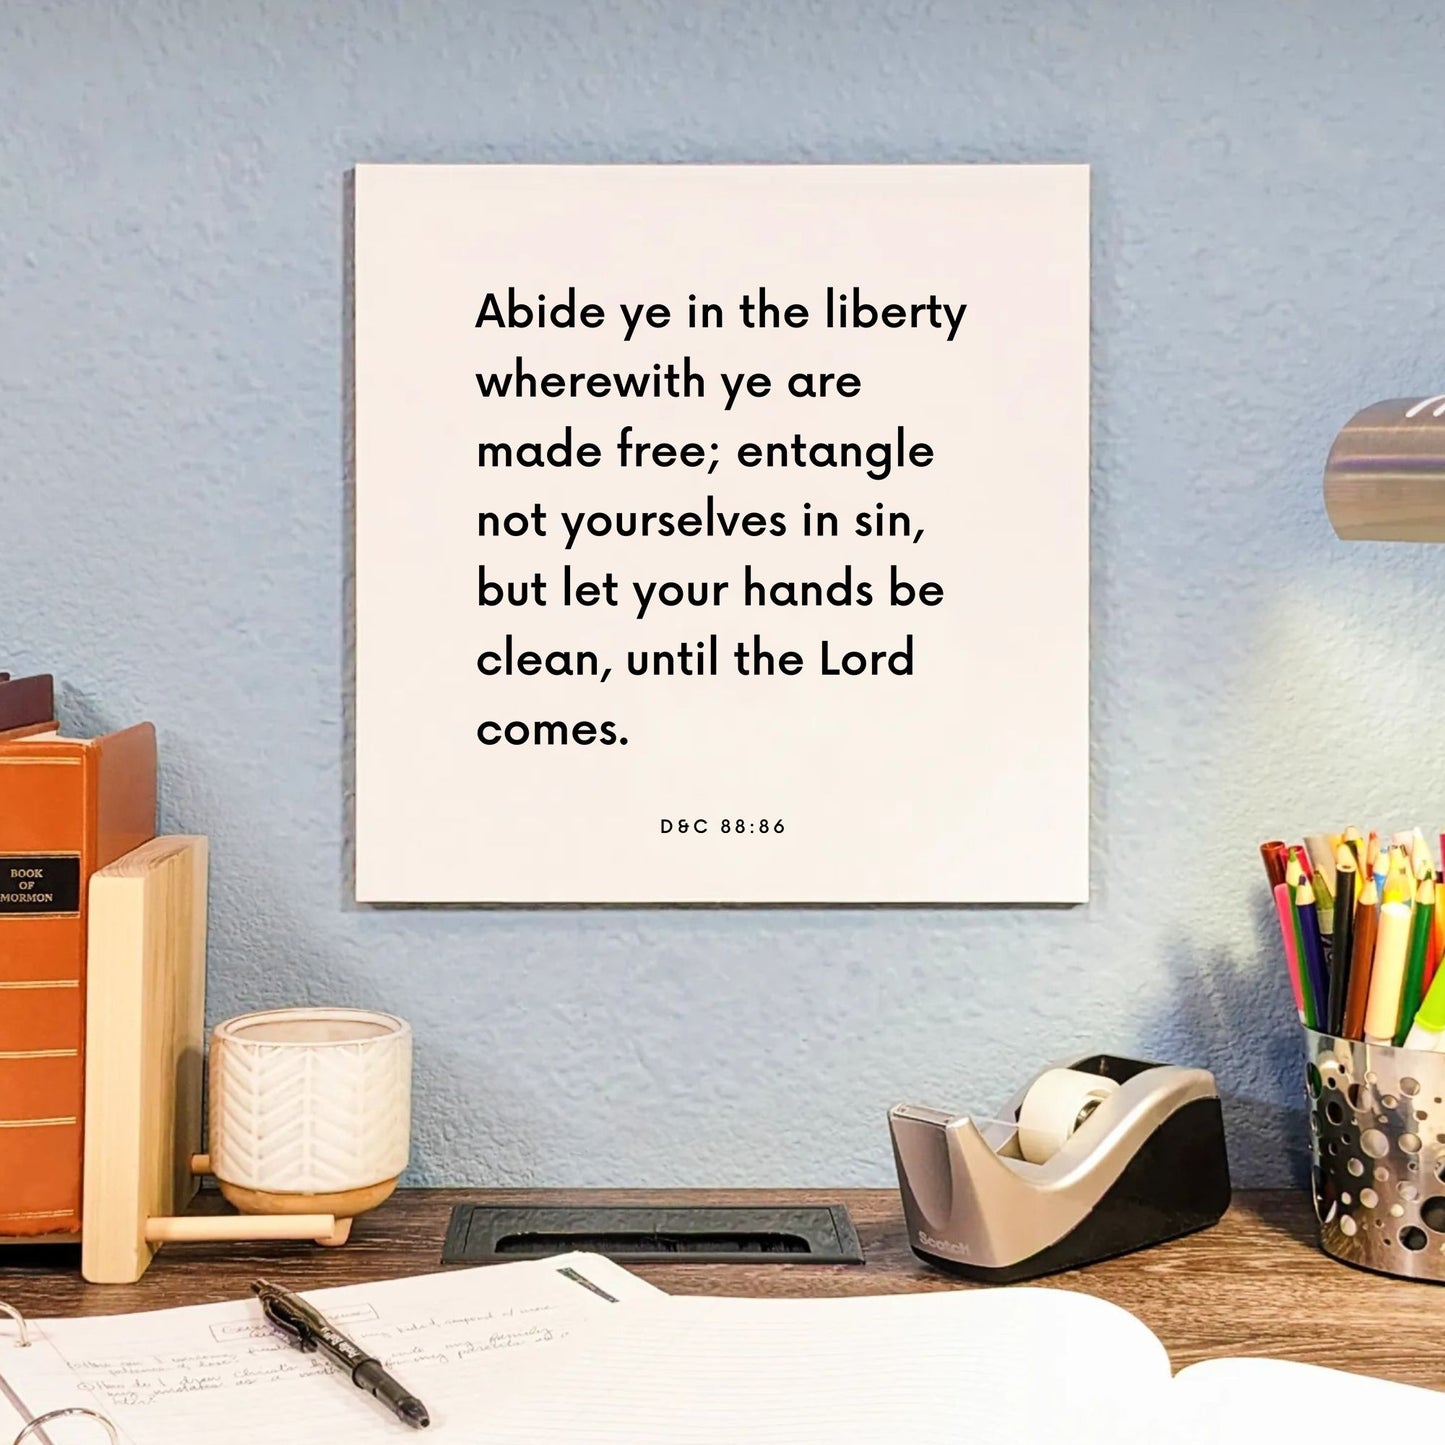 Desk mouting of the scripture tile for D&C 88:86 - "Abide ye in the liberty wherewith ye are made free"